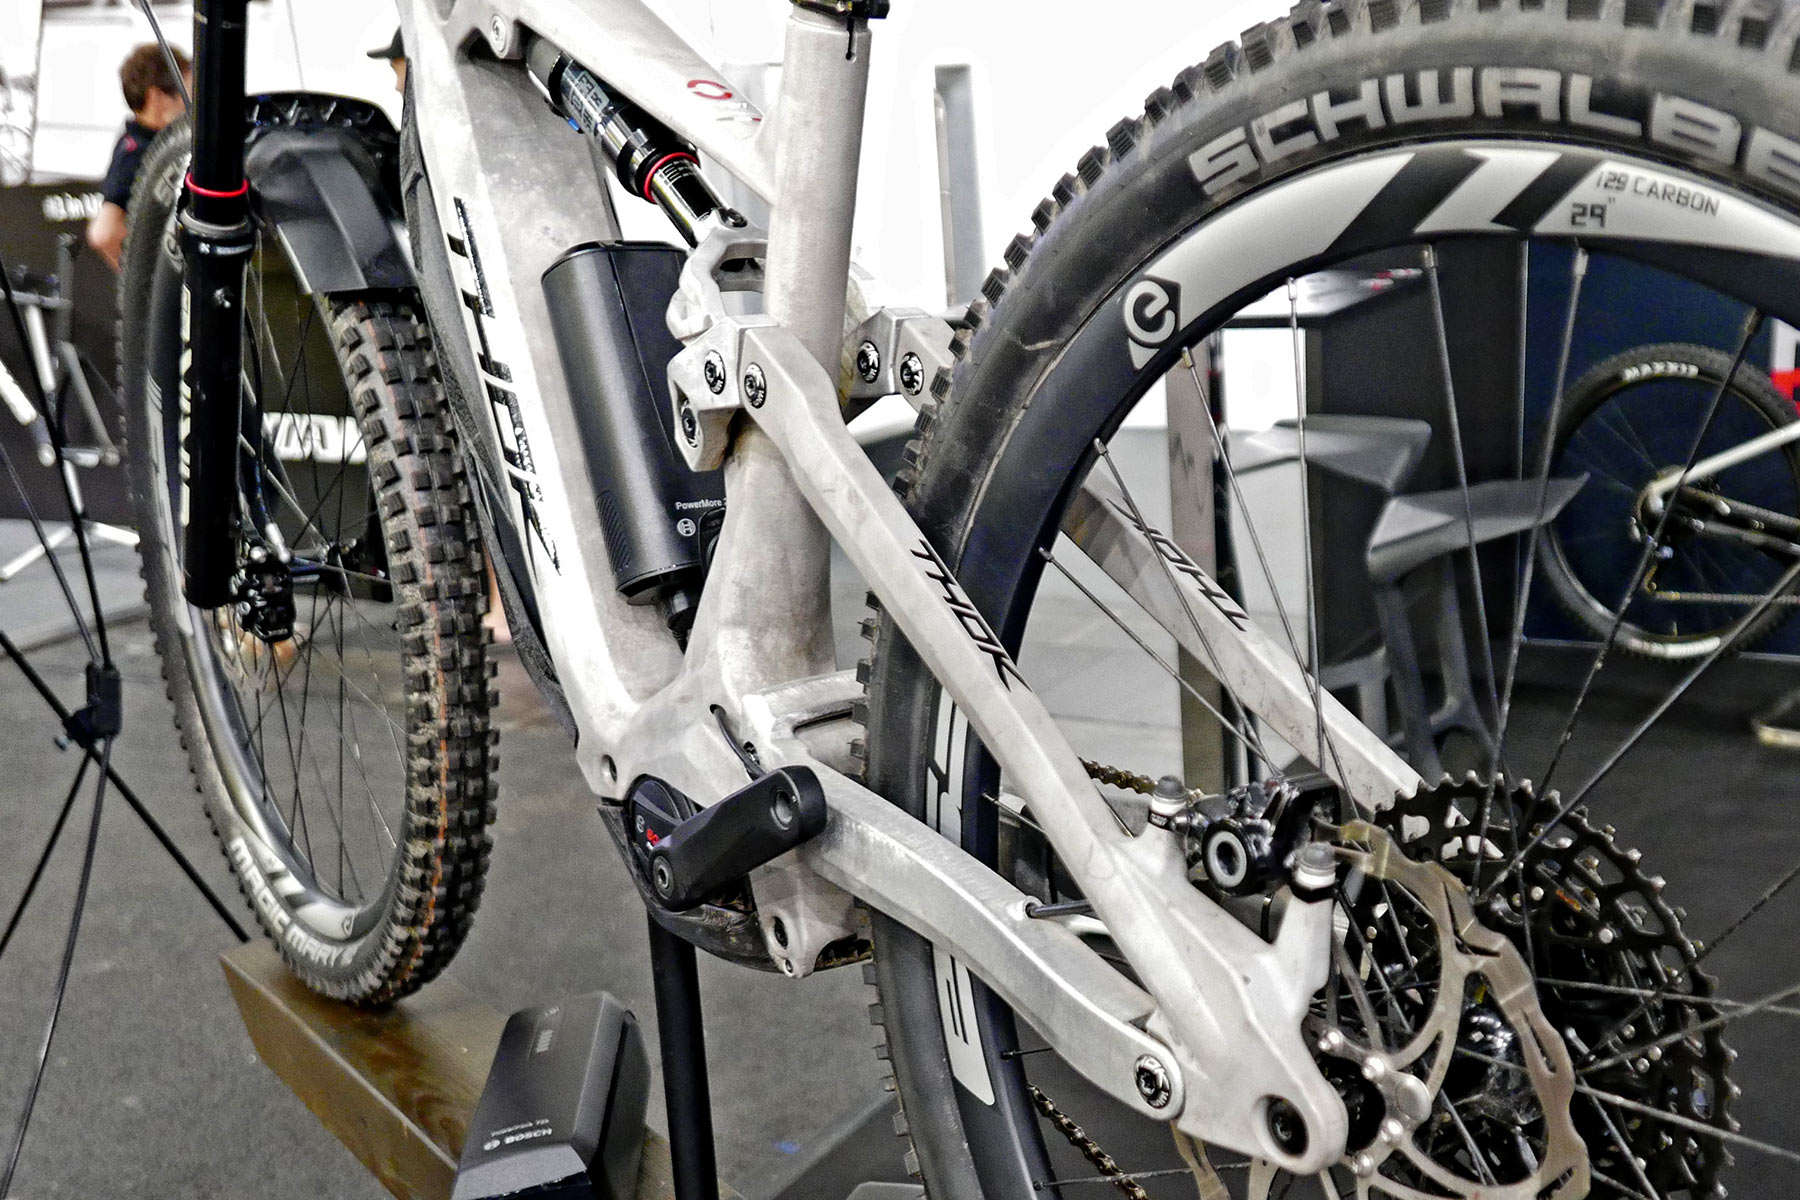 Thok Project 4 eMTB prototype, lightweight 3D-printed alloy all-mountain ebike, rear end